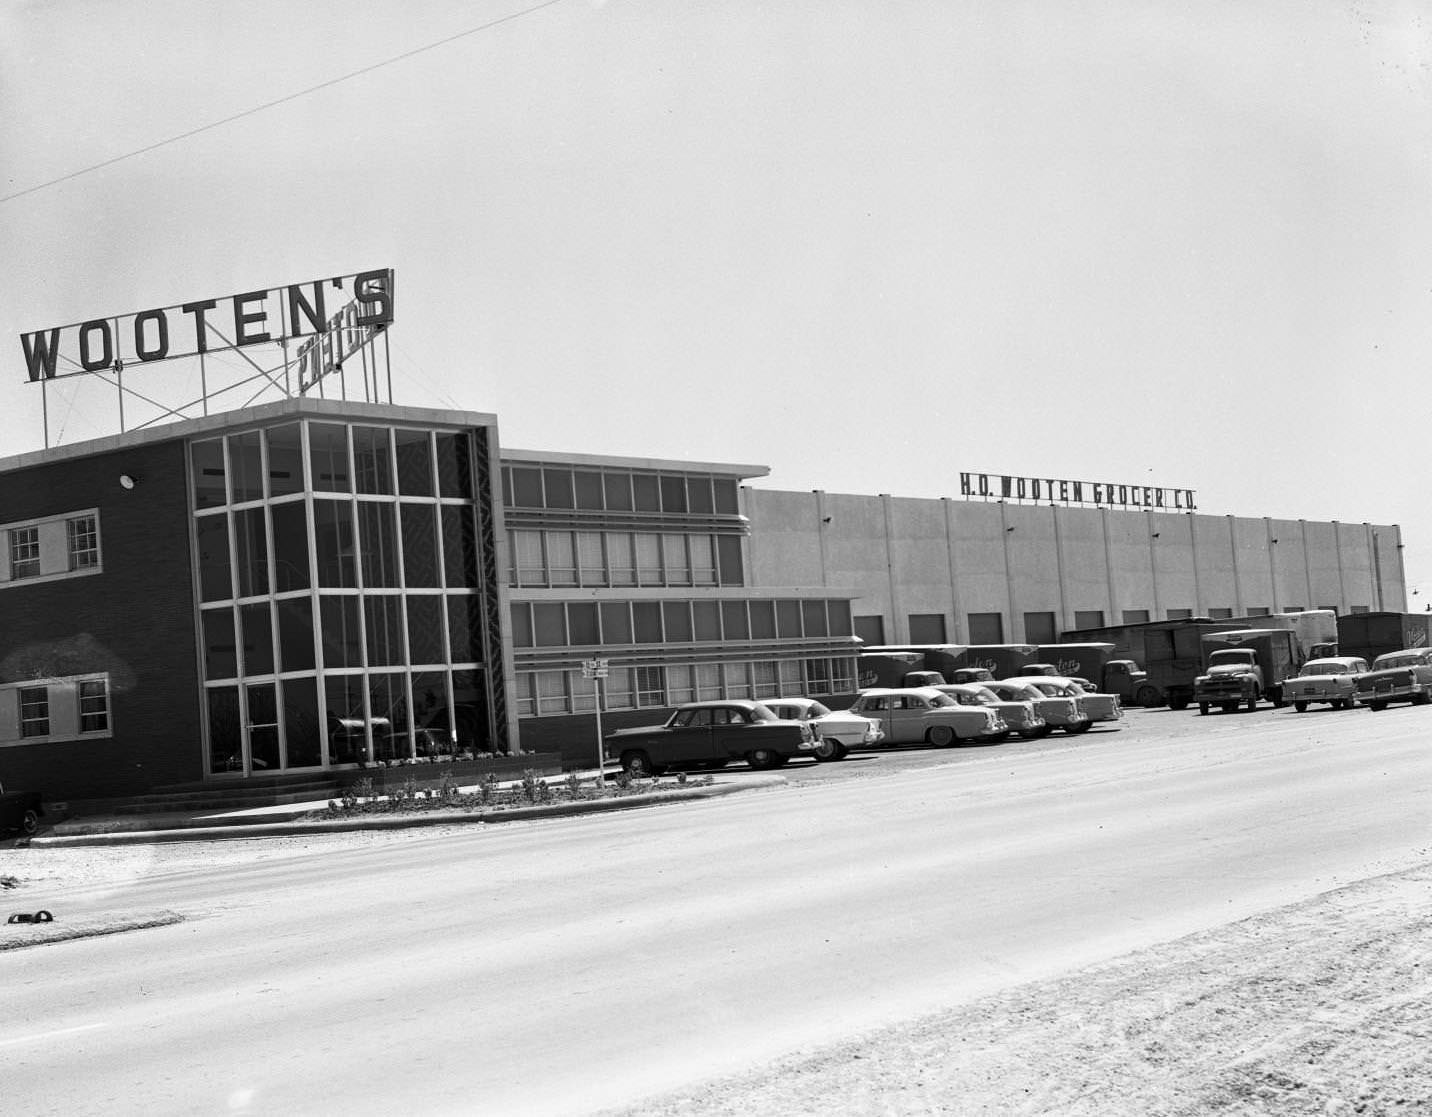 The H. O. Wooten Grocery Company building located at Treadaway Boulevard at South 13th Street in Abilene, Texas, 1956